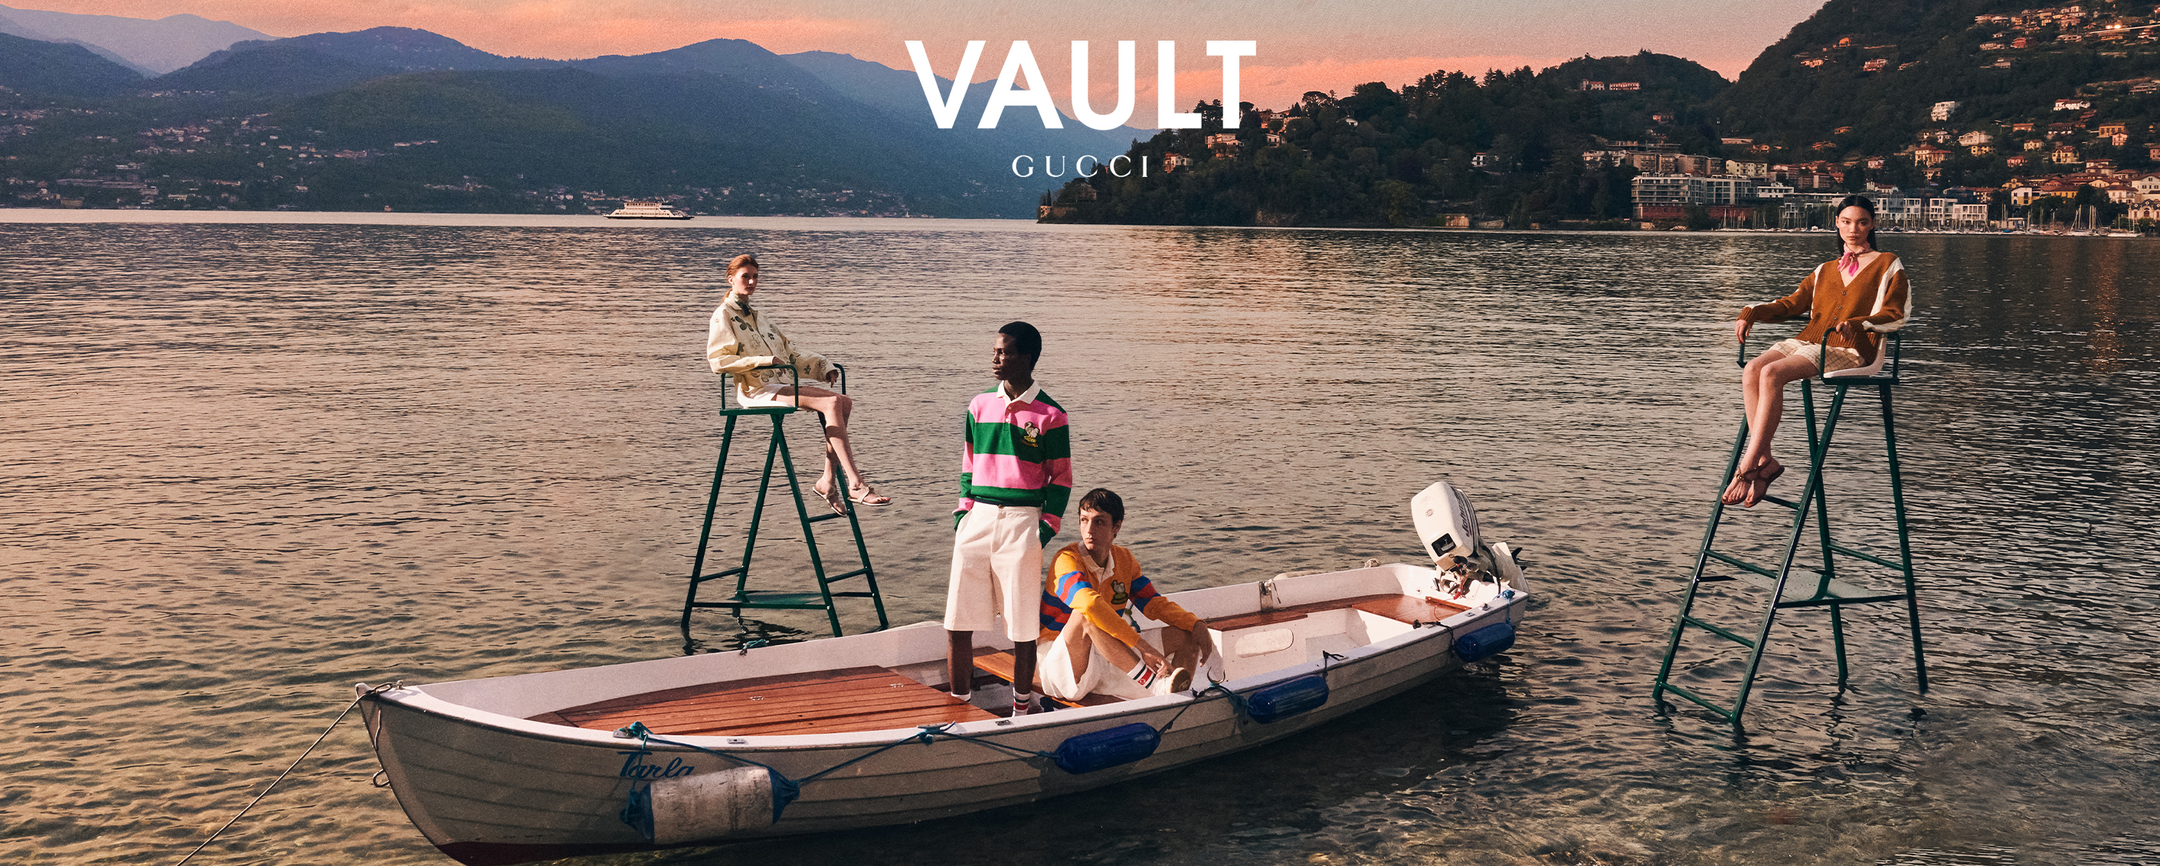 ROWING BLAZERS FOR GUCCI VAULT